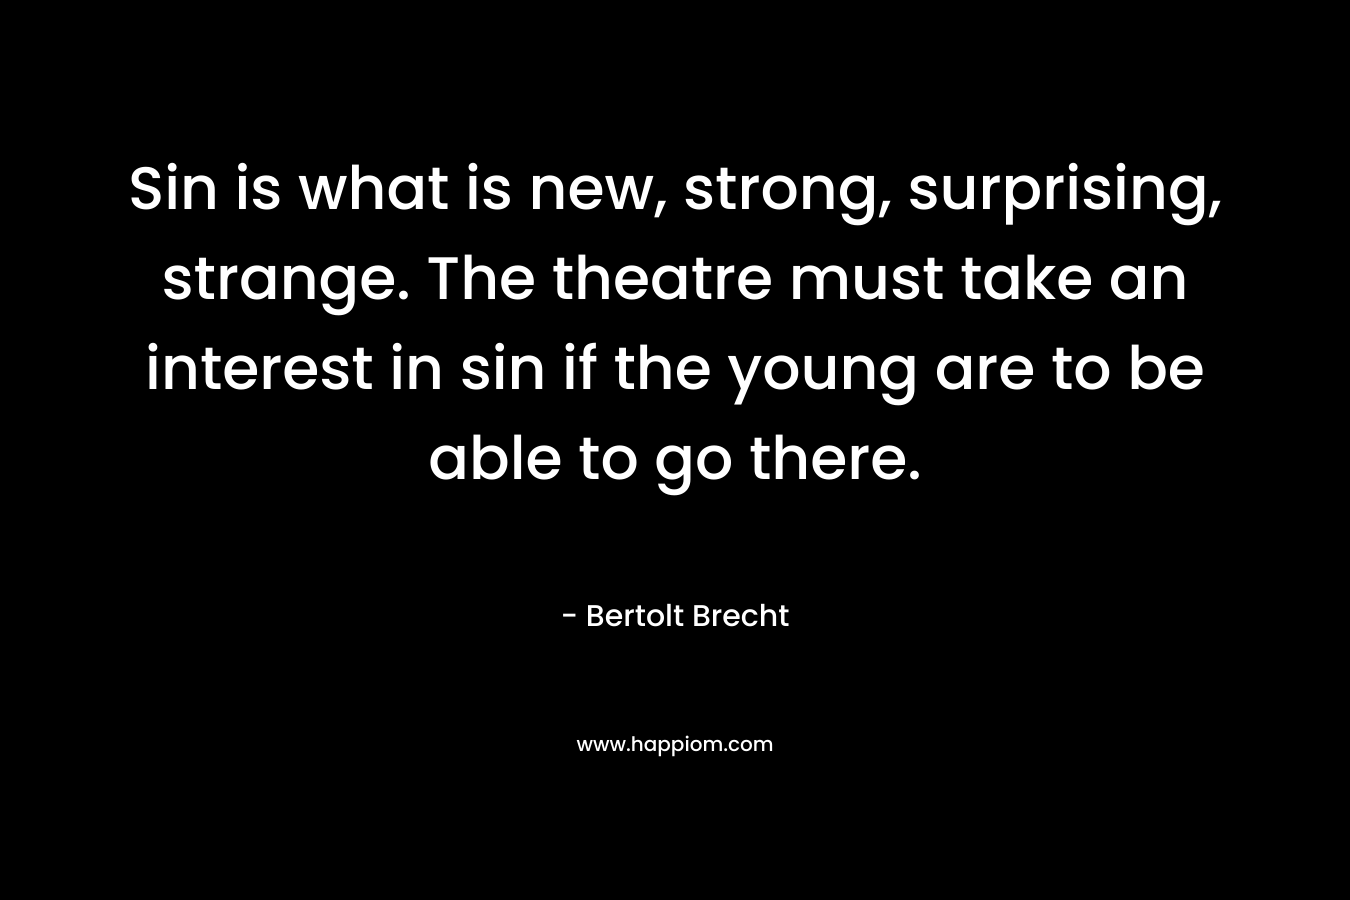 Sin is what is new, strong, surprising, strange. The theatre must take an interest in sin if the young are to be able to go there. – Bertolt Brecht